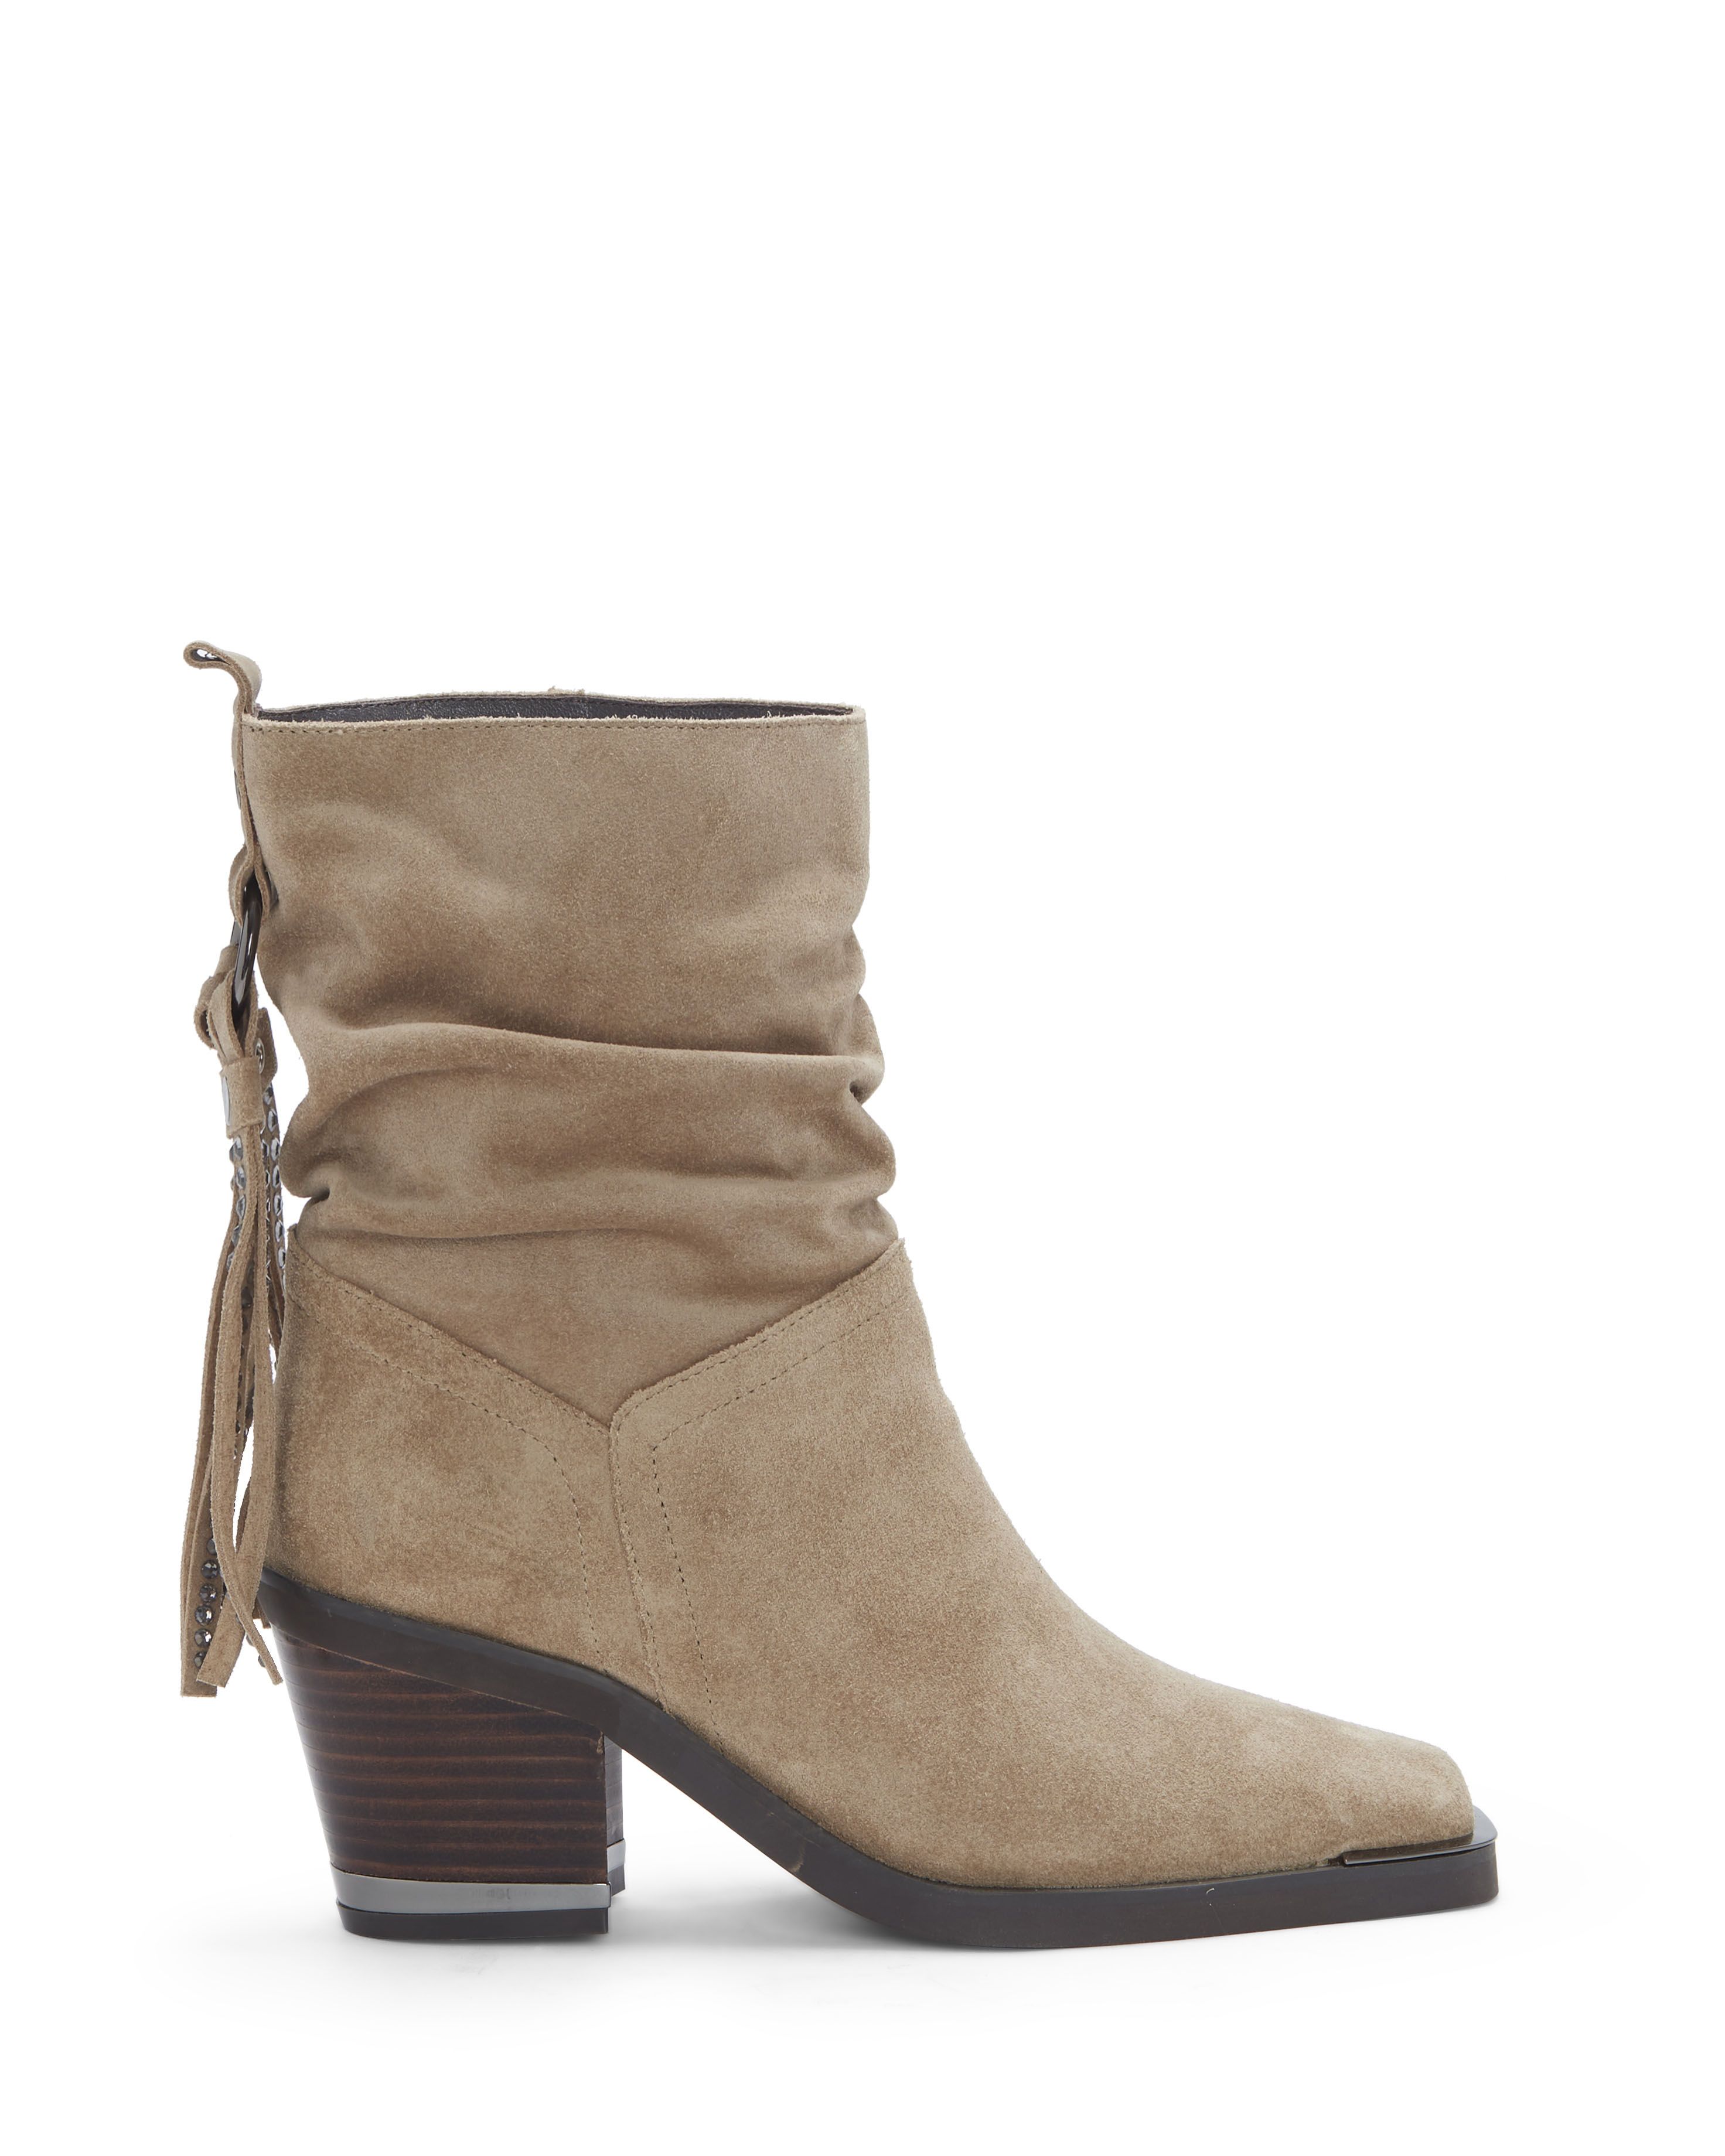 Dremmia Bootie | Vince Camuto